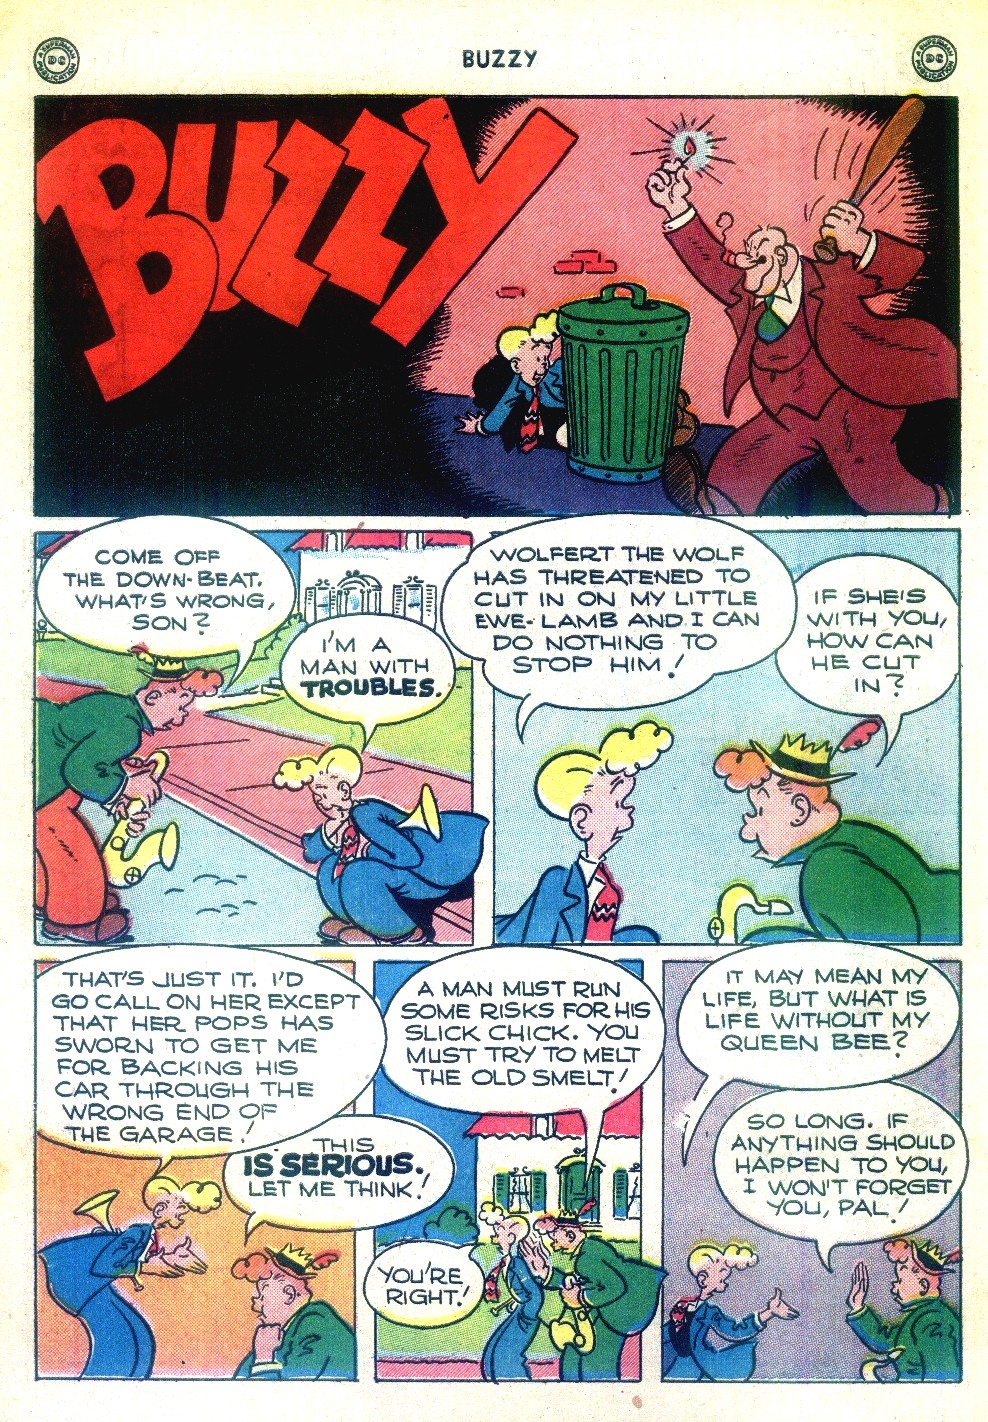 Read online Buzzy comic -  Issue #6 - 12